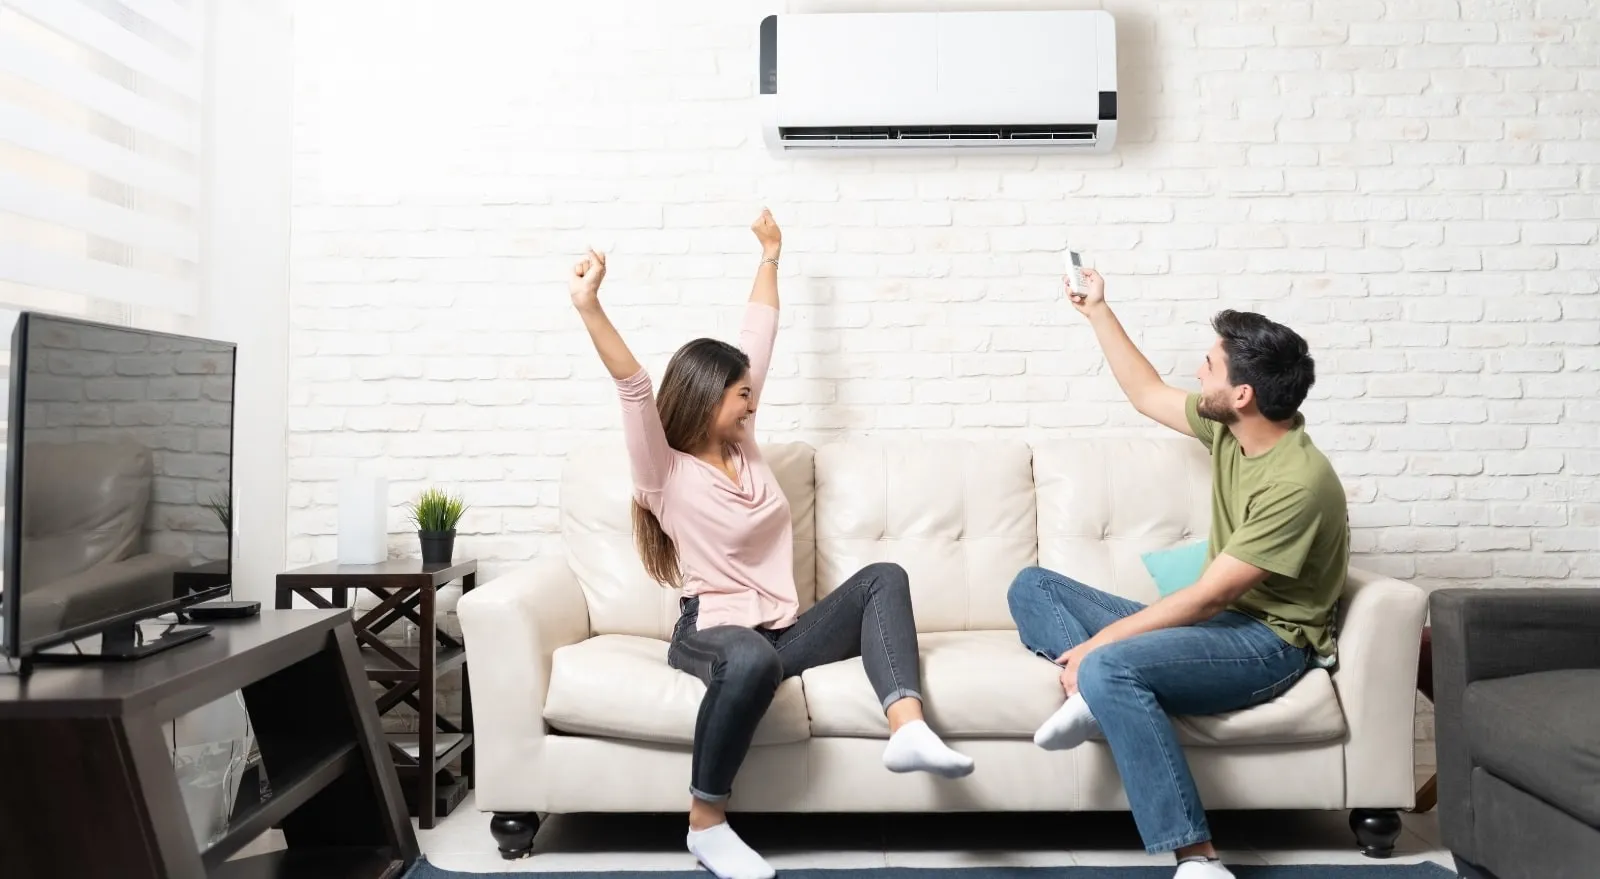 Take a step towards a greener future by choosing Haier and Mitsubishi mini-splits installed by Premier Air